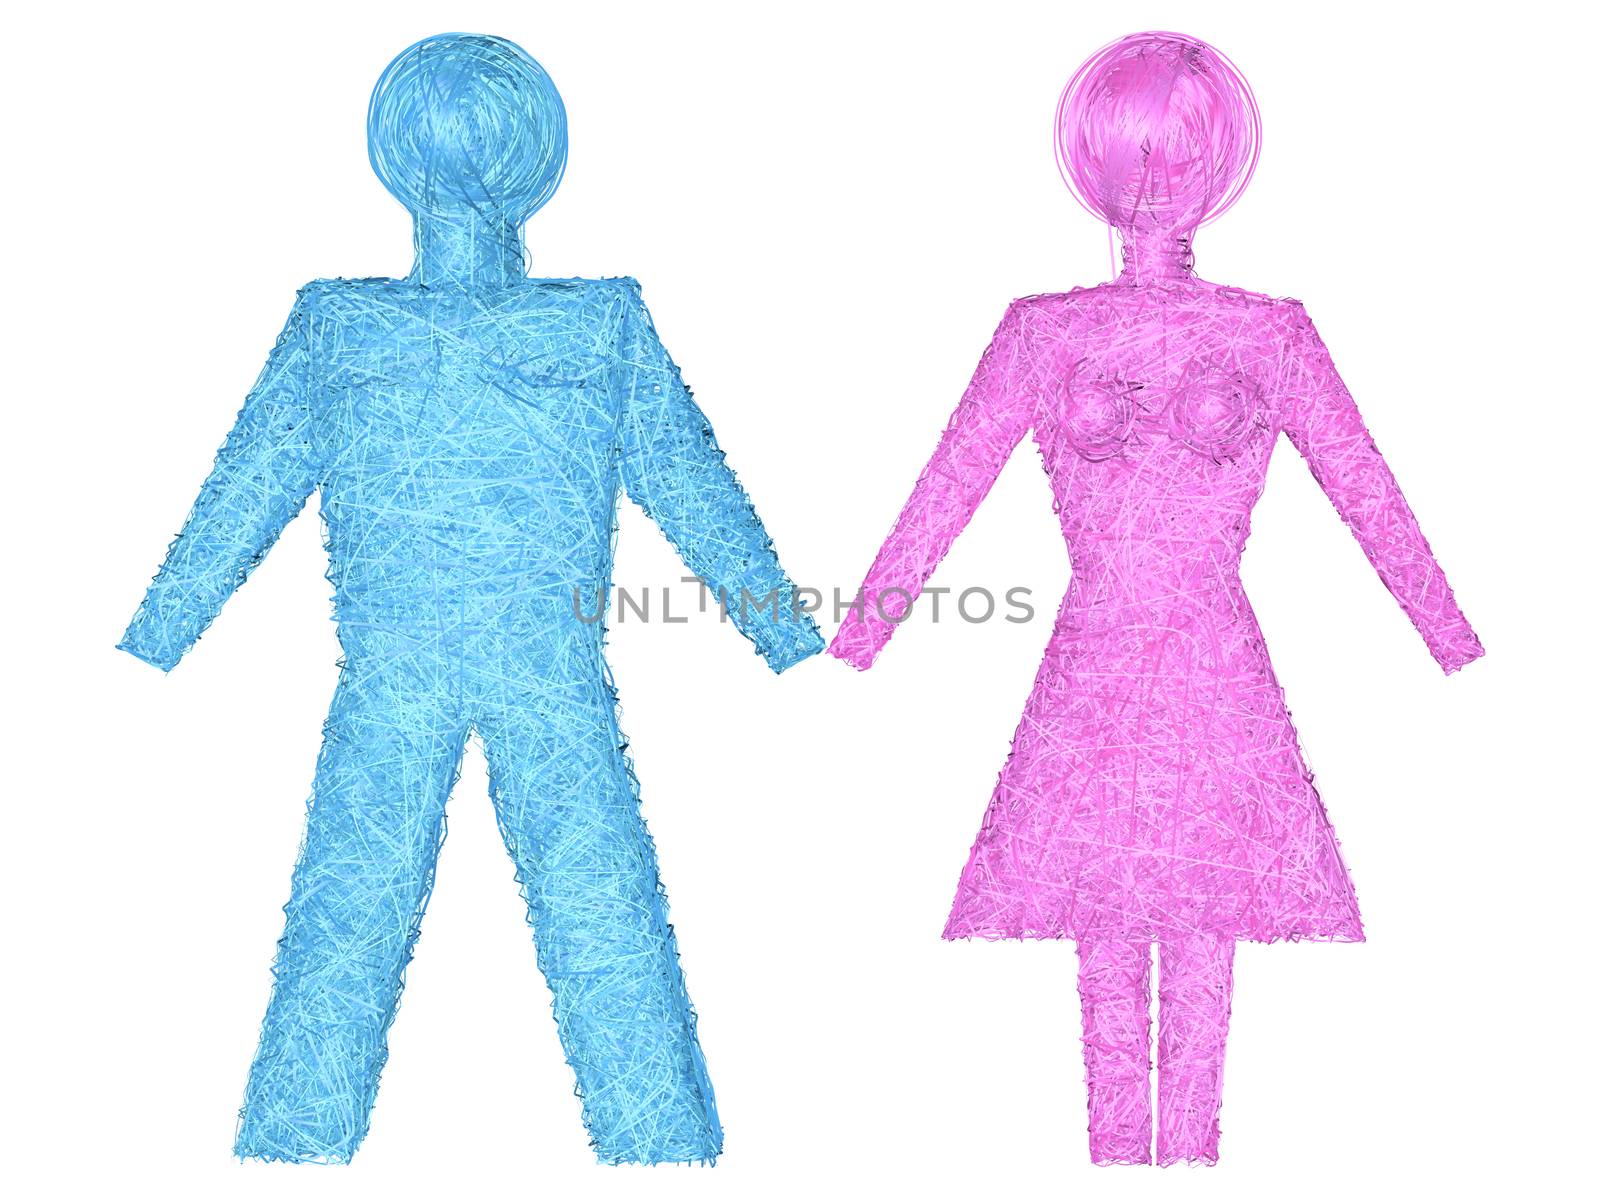 Male and female shapes composed of blue and pink stripes isolated on white background. High resolution 3D 
image